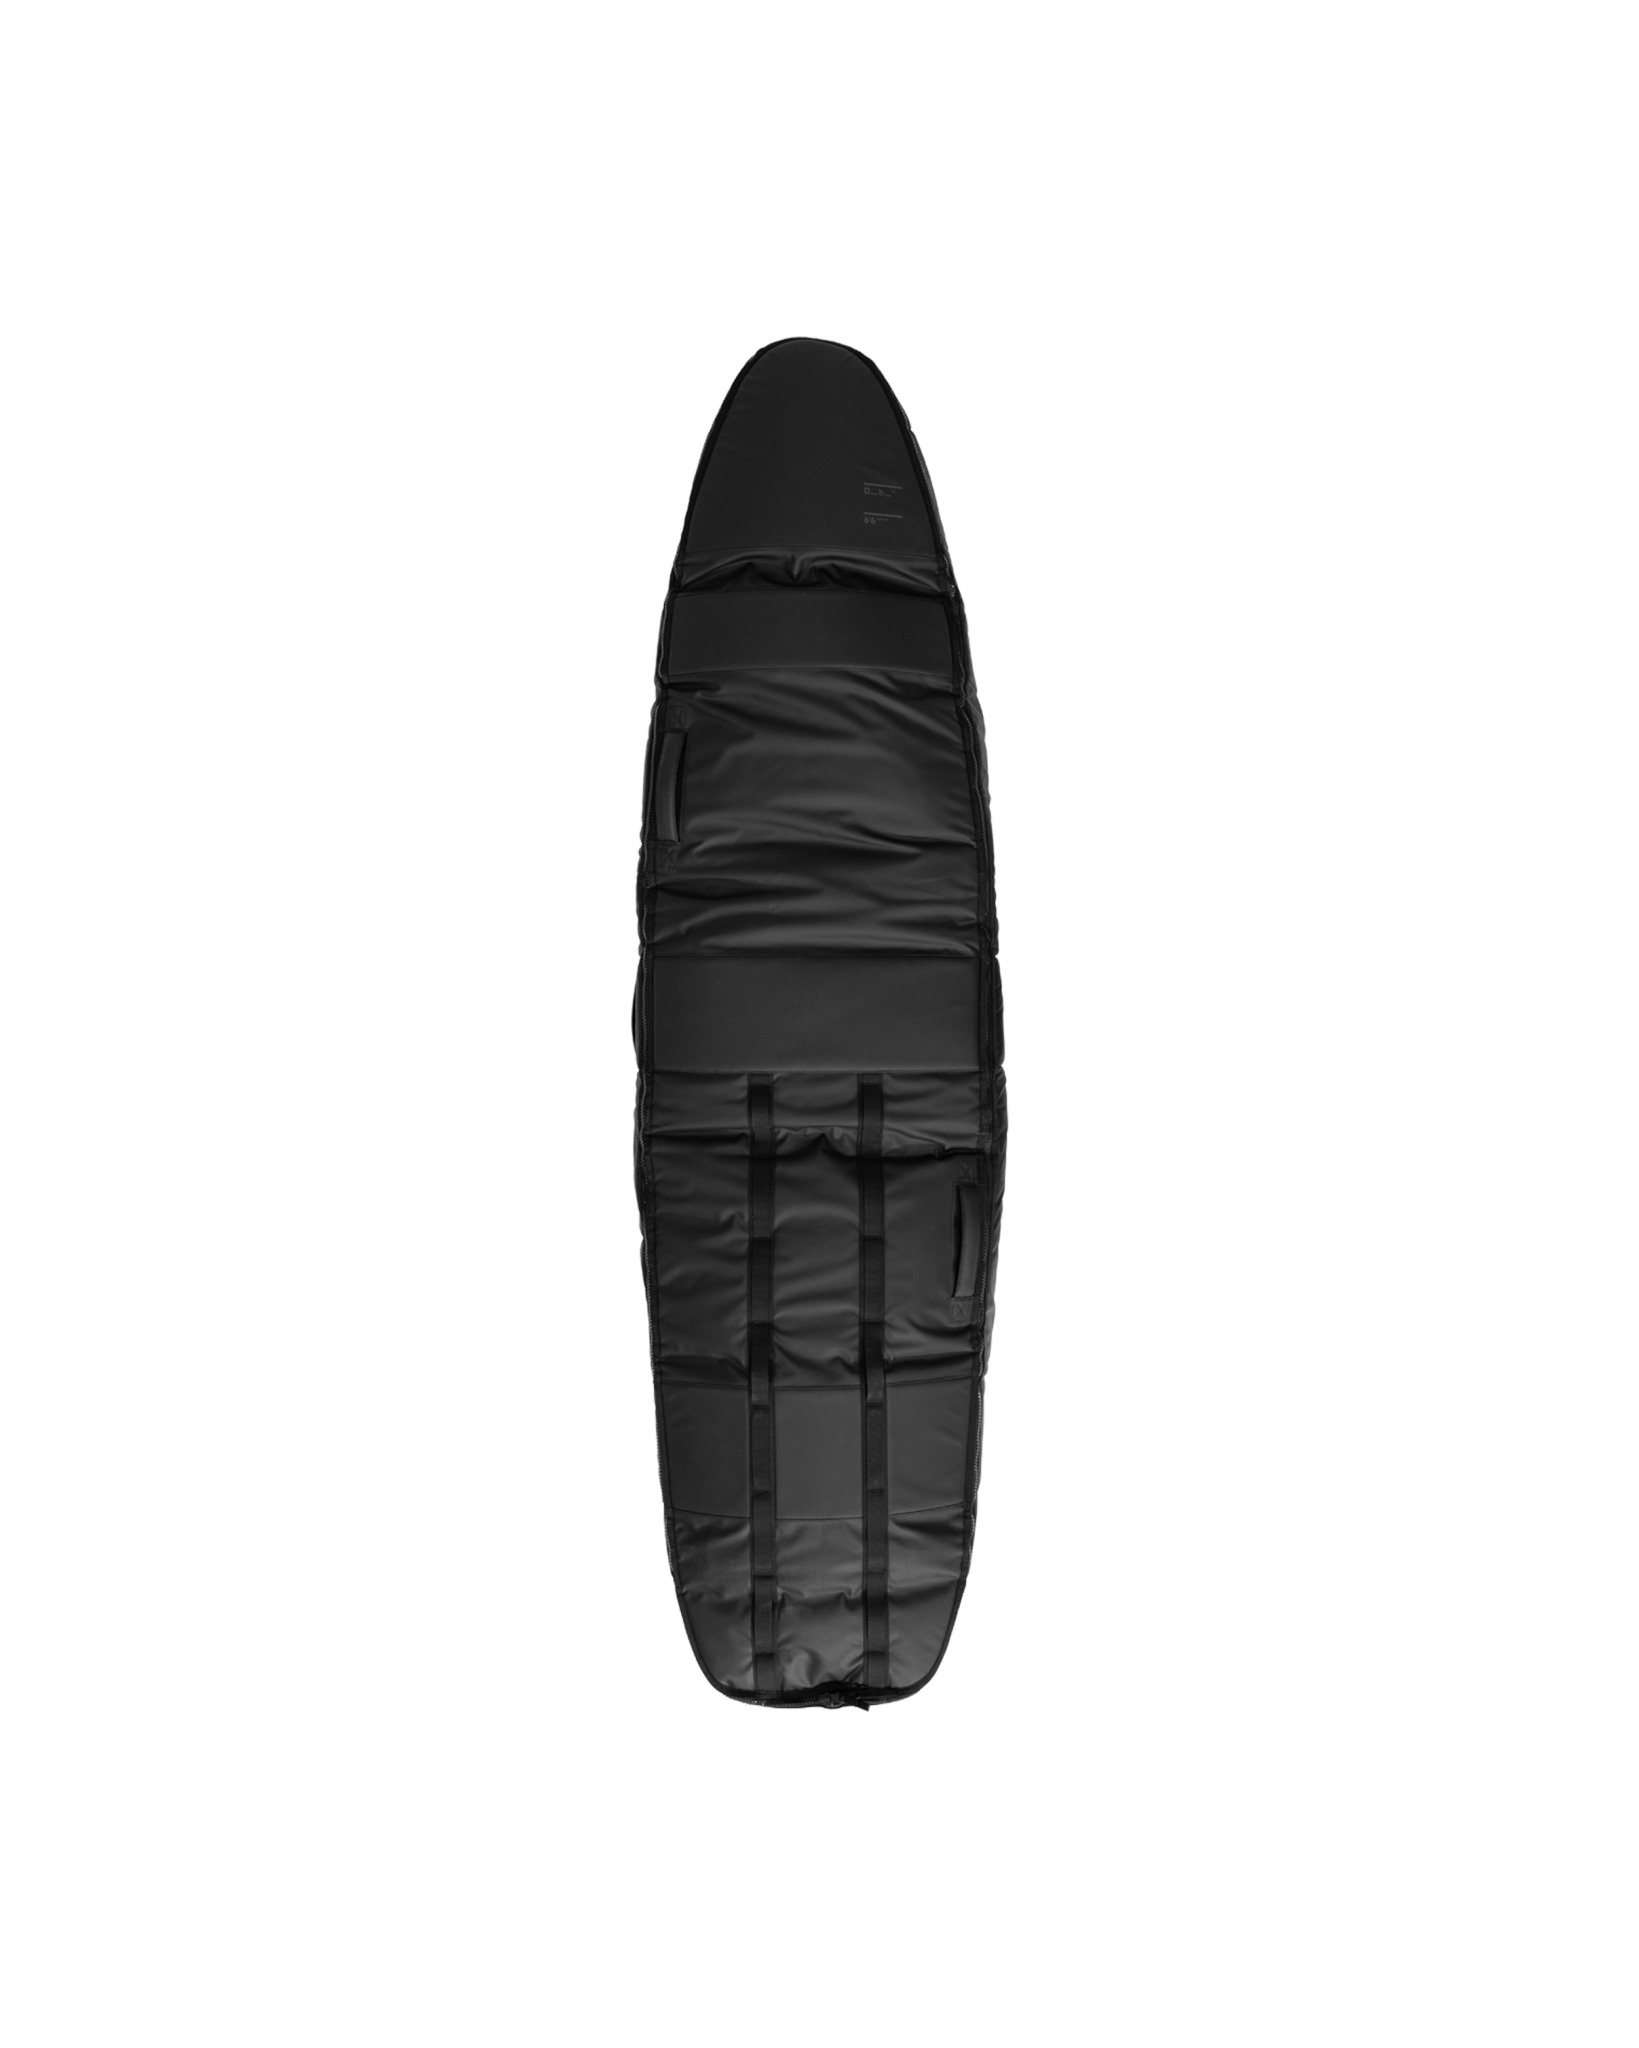 Surf Pro Coffin 6’6 - 3-4 Boards - Black Out